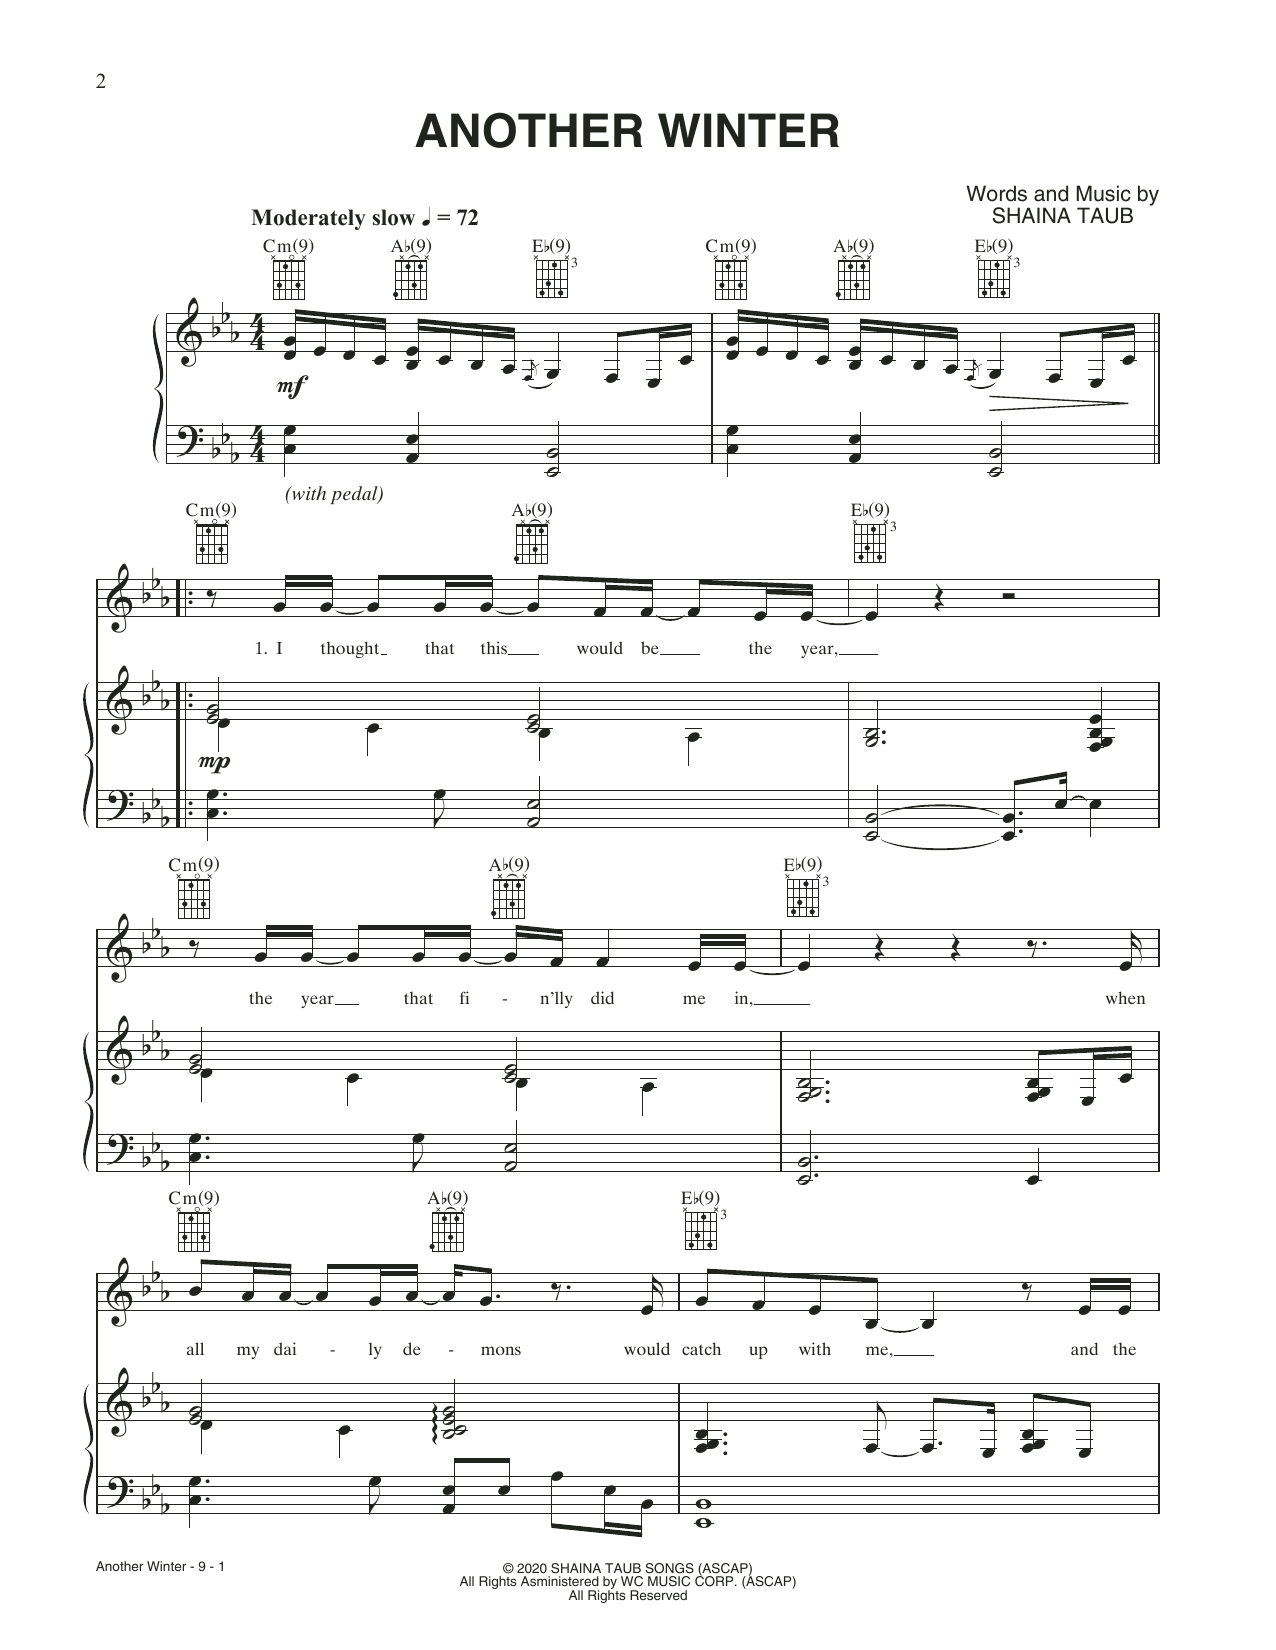 Download Shaina Taub Another Winter Sheet Music